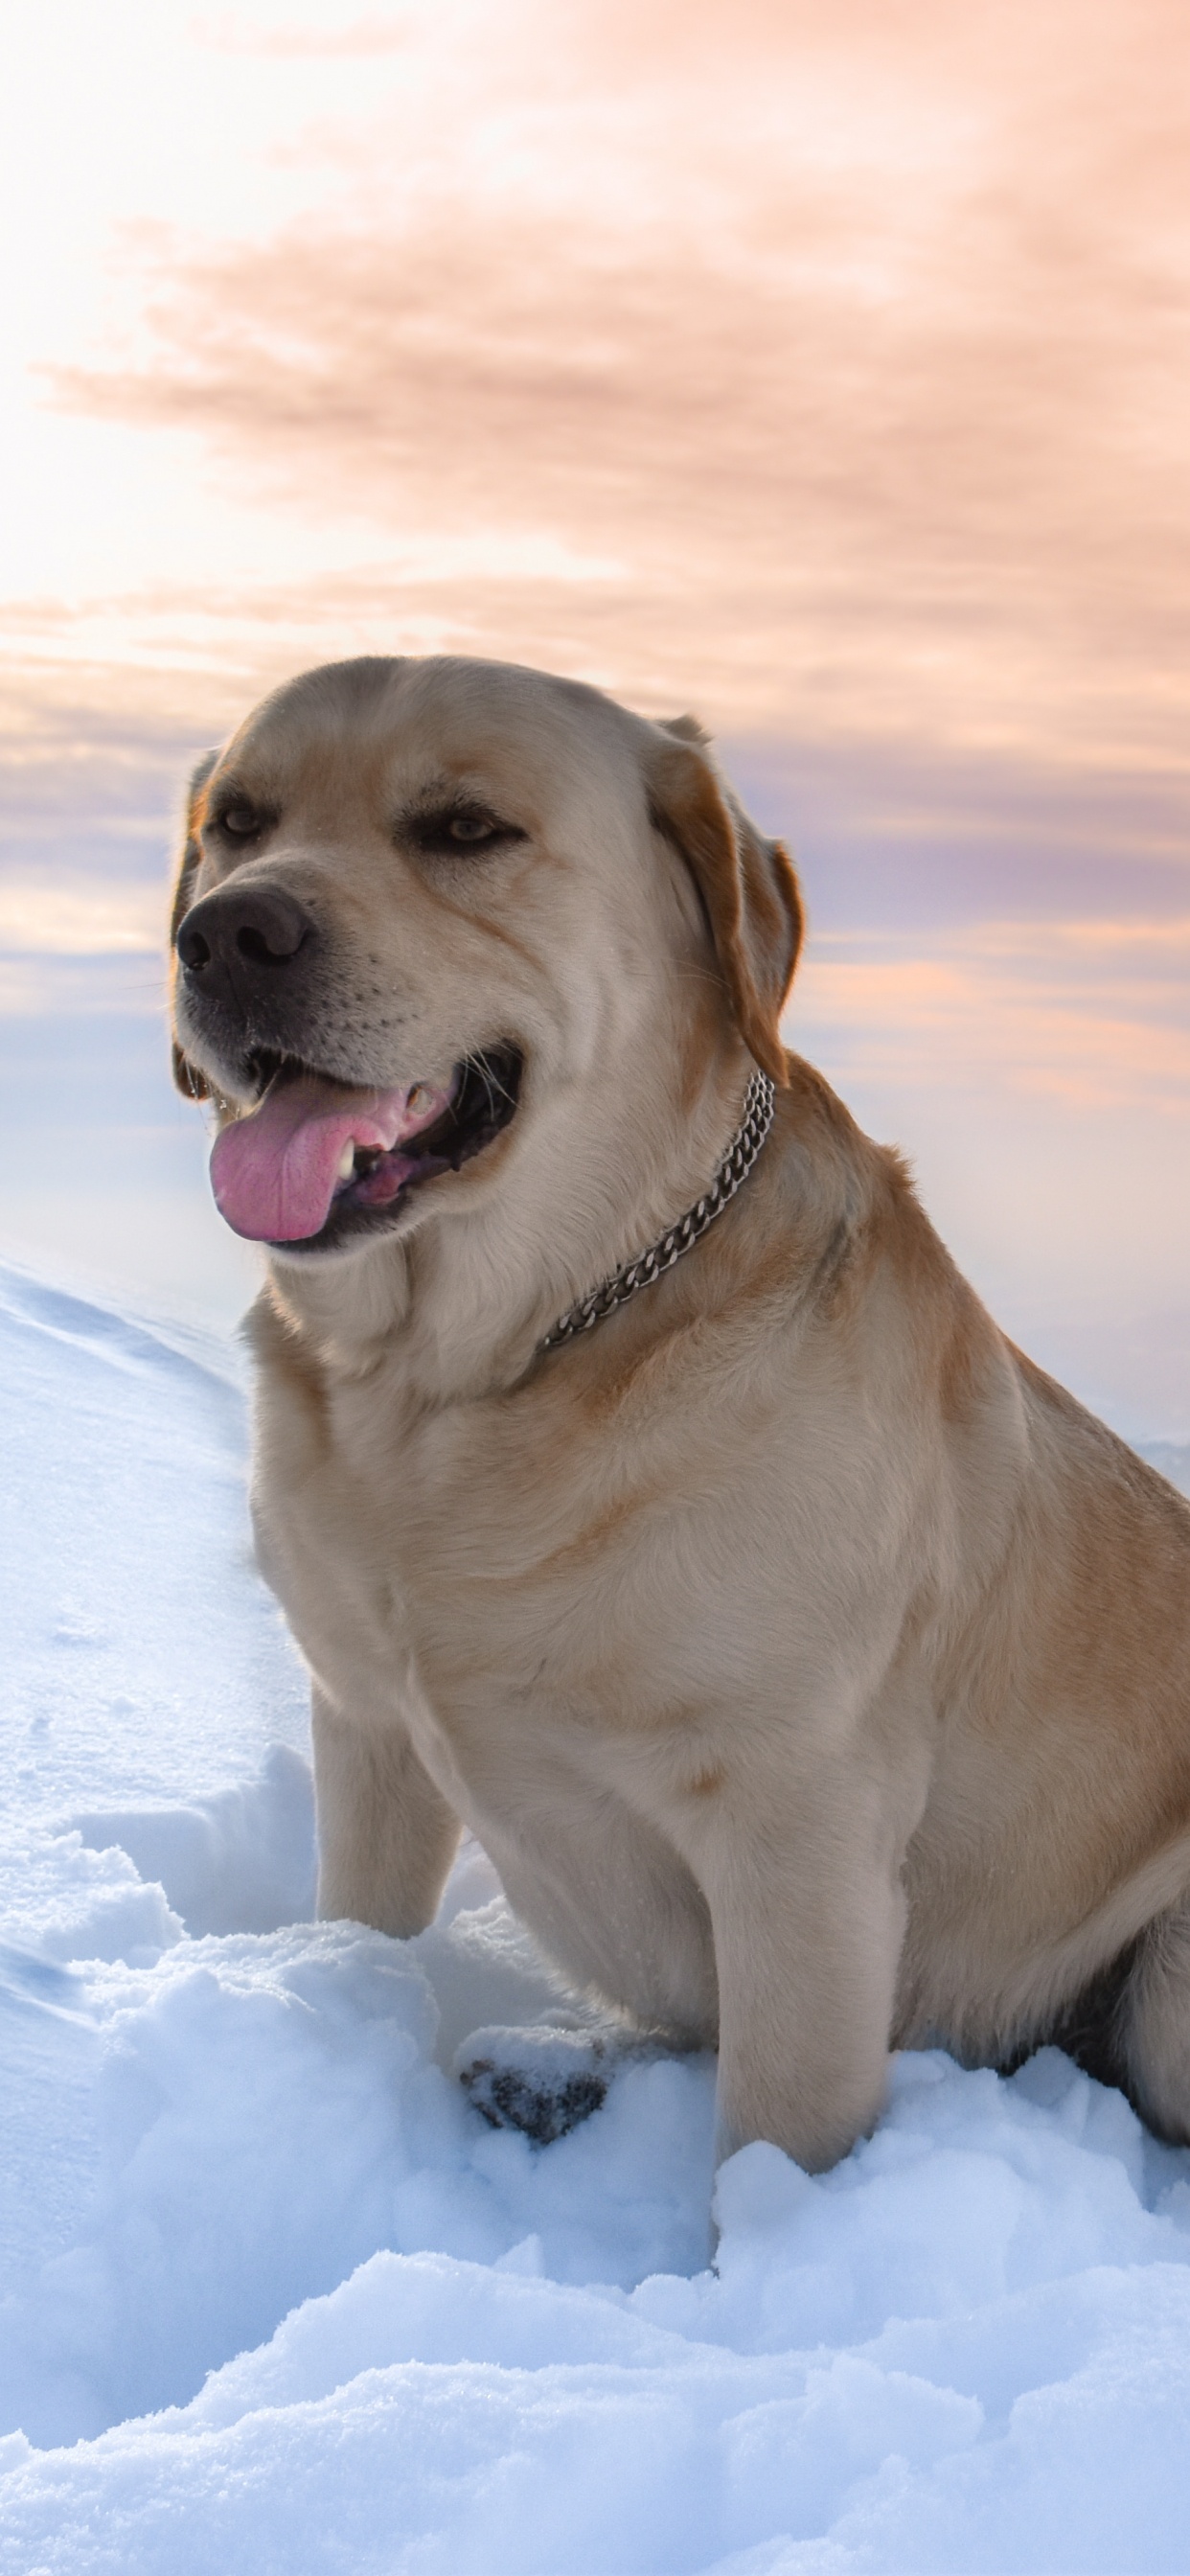 Brown Short Coated Dog on Snow Covered Ground During Daytime. Wallpaper in 1242x2688 Resolution